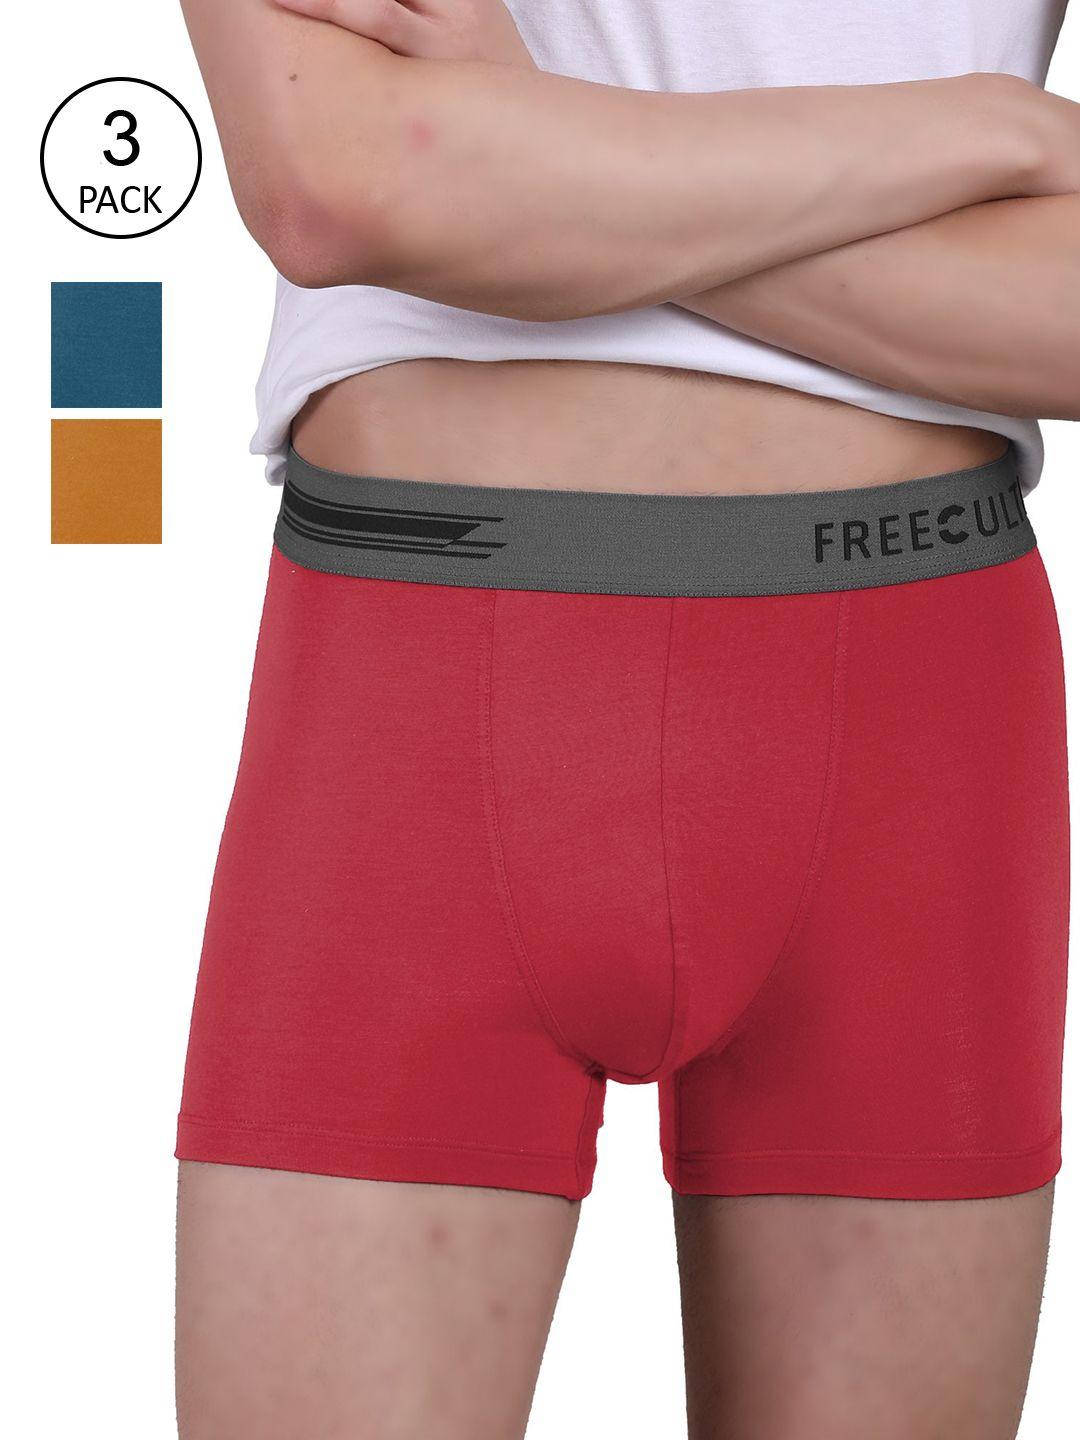 freecultr men pack of 3 solid cotton trunk